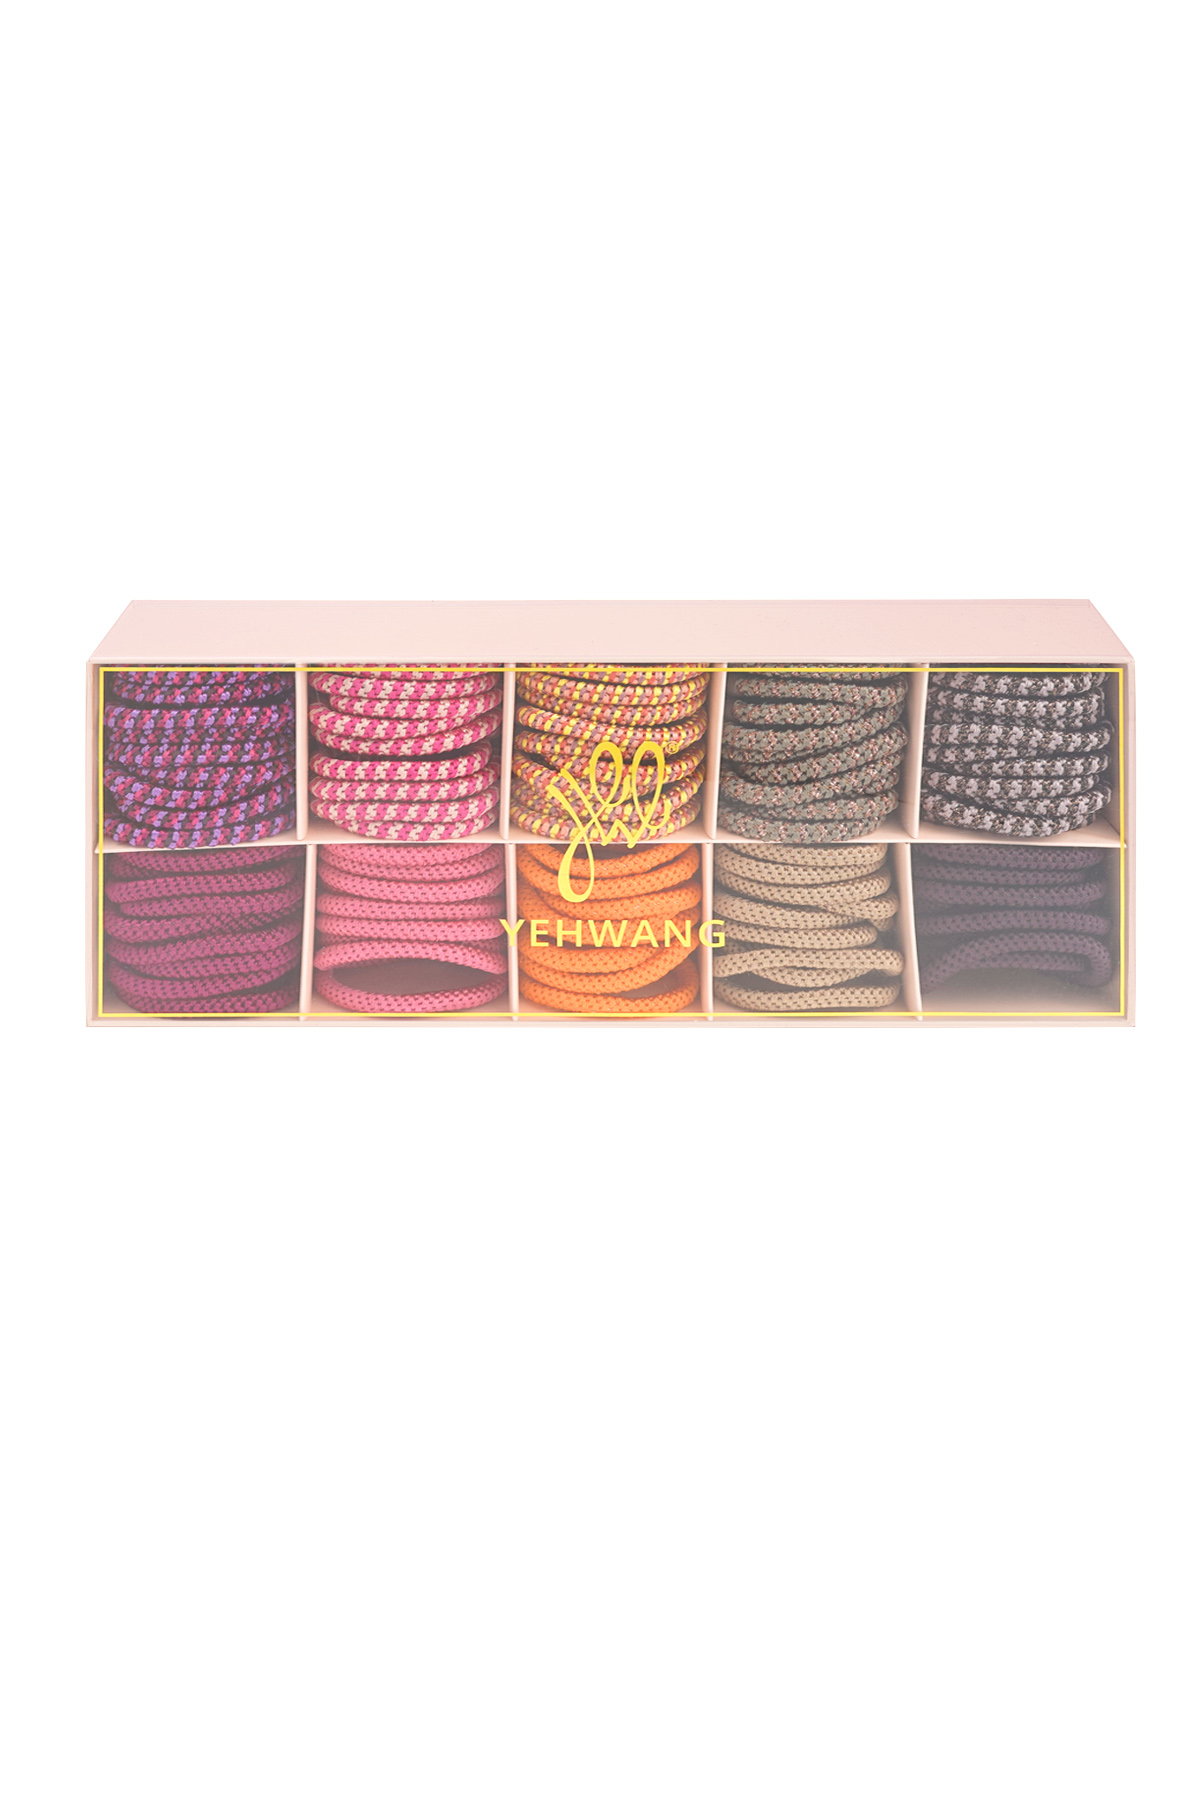 Hair elastic bracelets box bright and basic - multi h5 Picture2